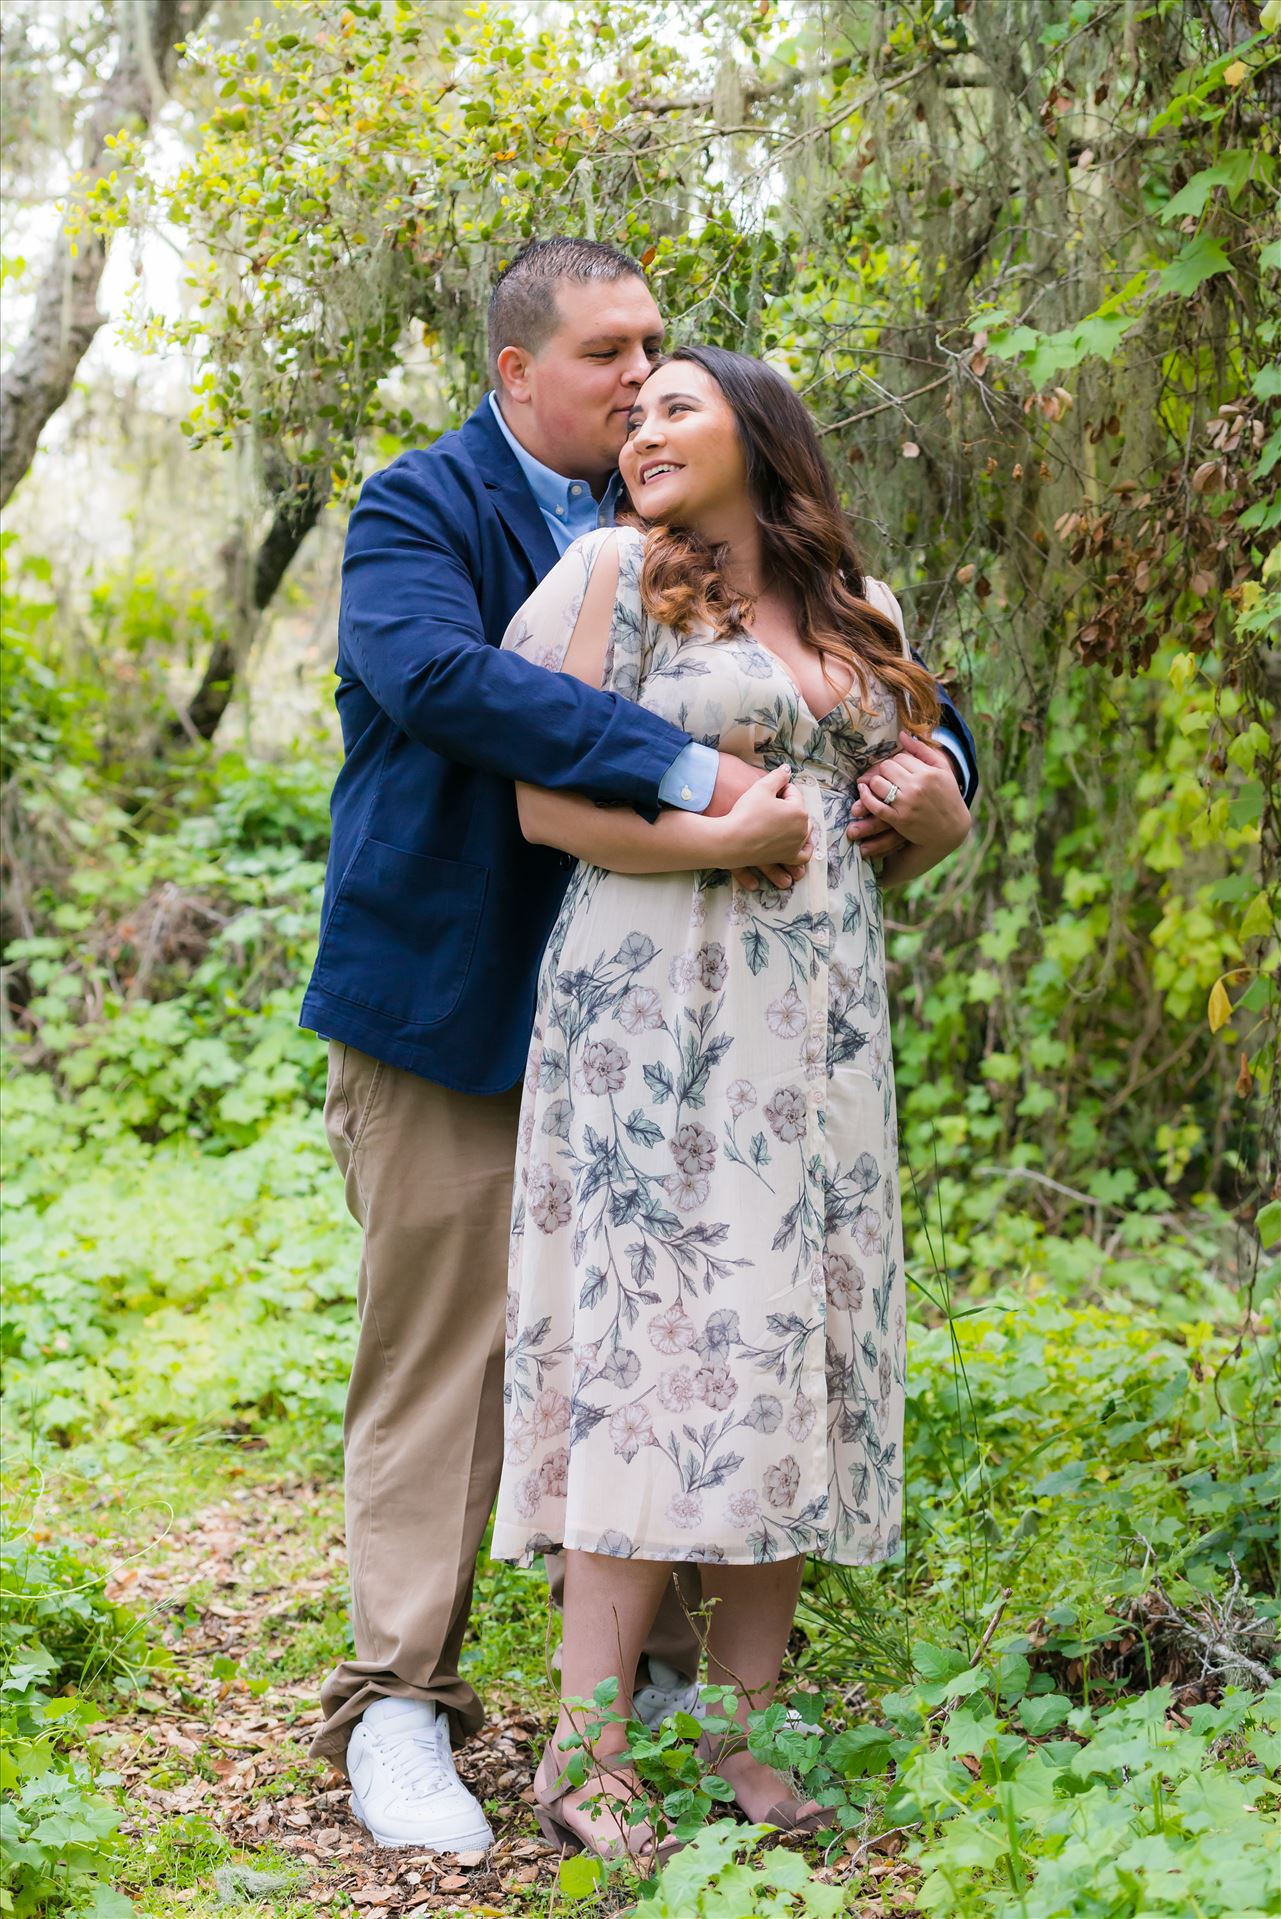 DSC_3148.JPG Los Osos Oaks Nature Reserve Engagement Photography Session by Mirror's Edge Photography.  Romantic engagement in the trees on the Central Coast of California by Sarah Williams